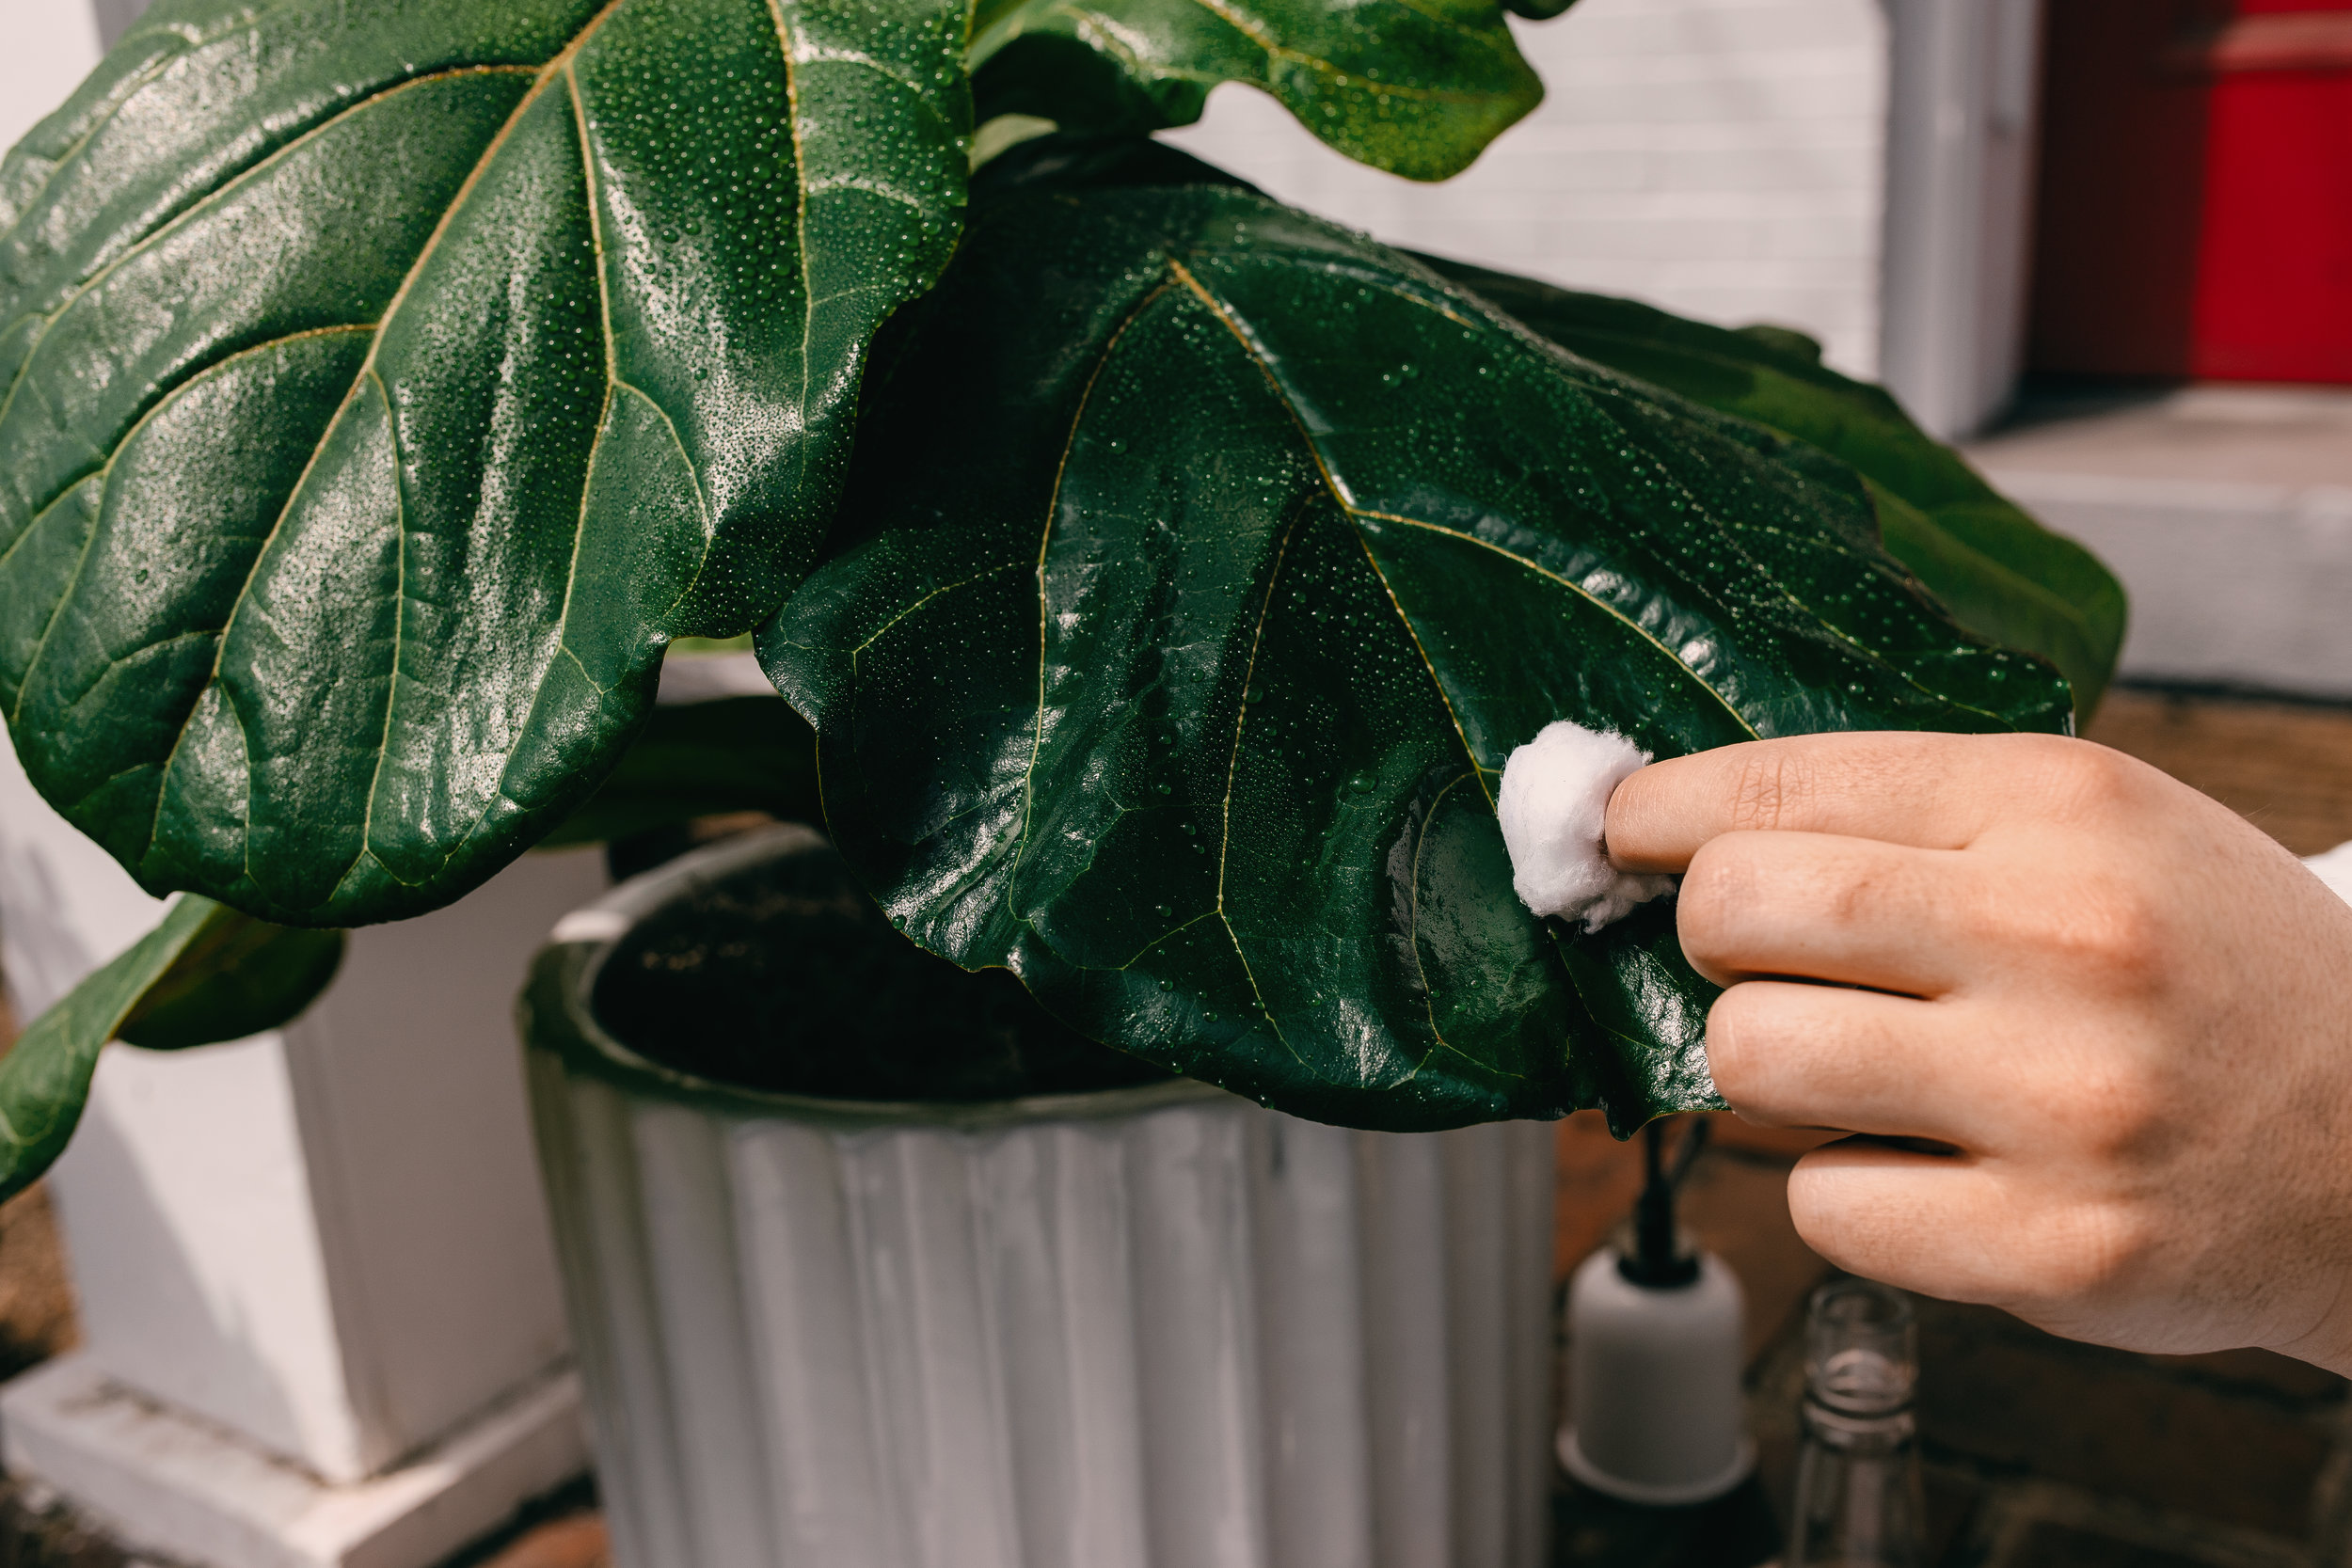  3. Wipe the infected area again with a clean, dry cotton ball to remove any pests or residue from the leaf. 